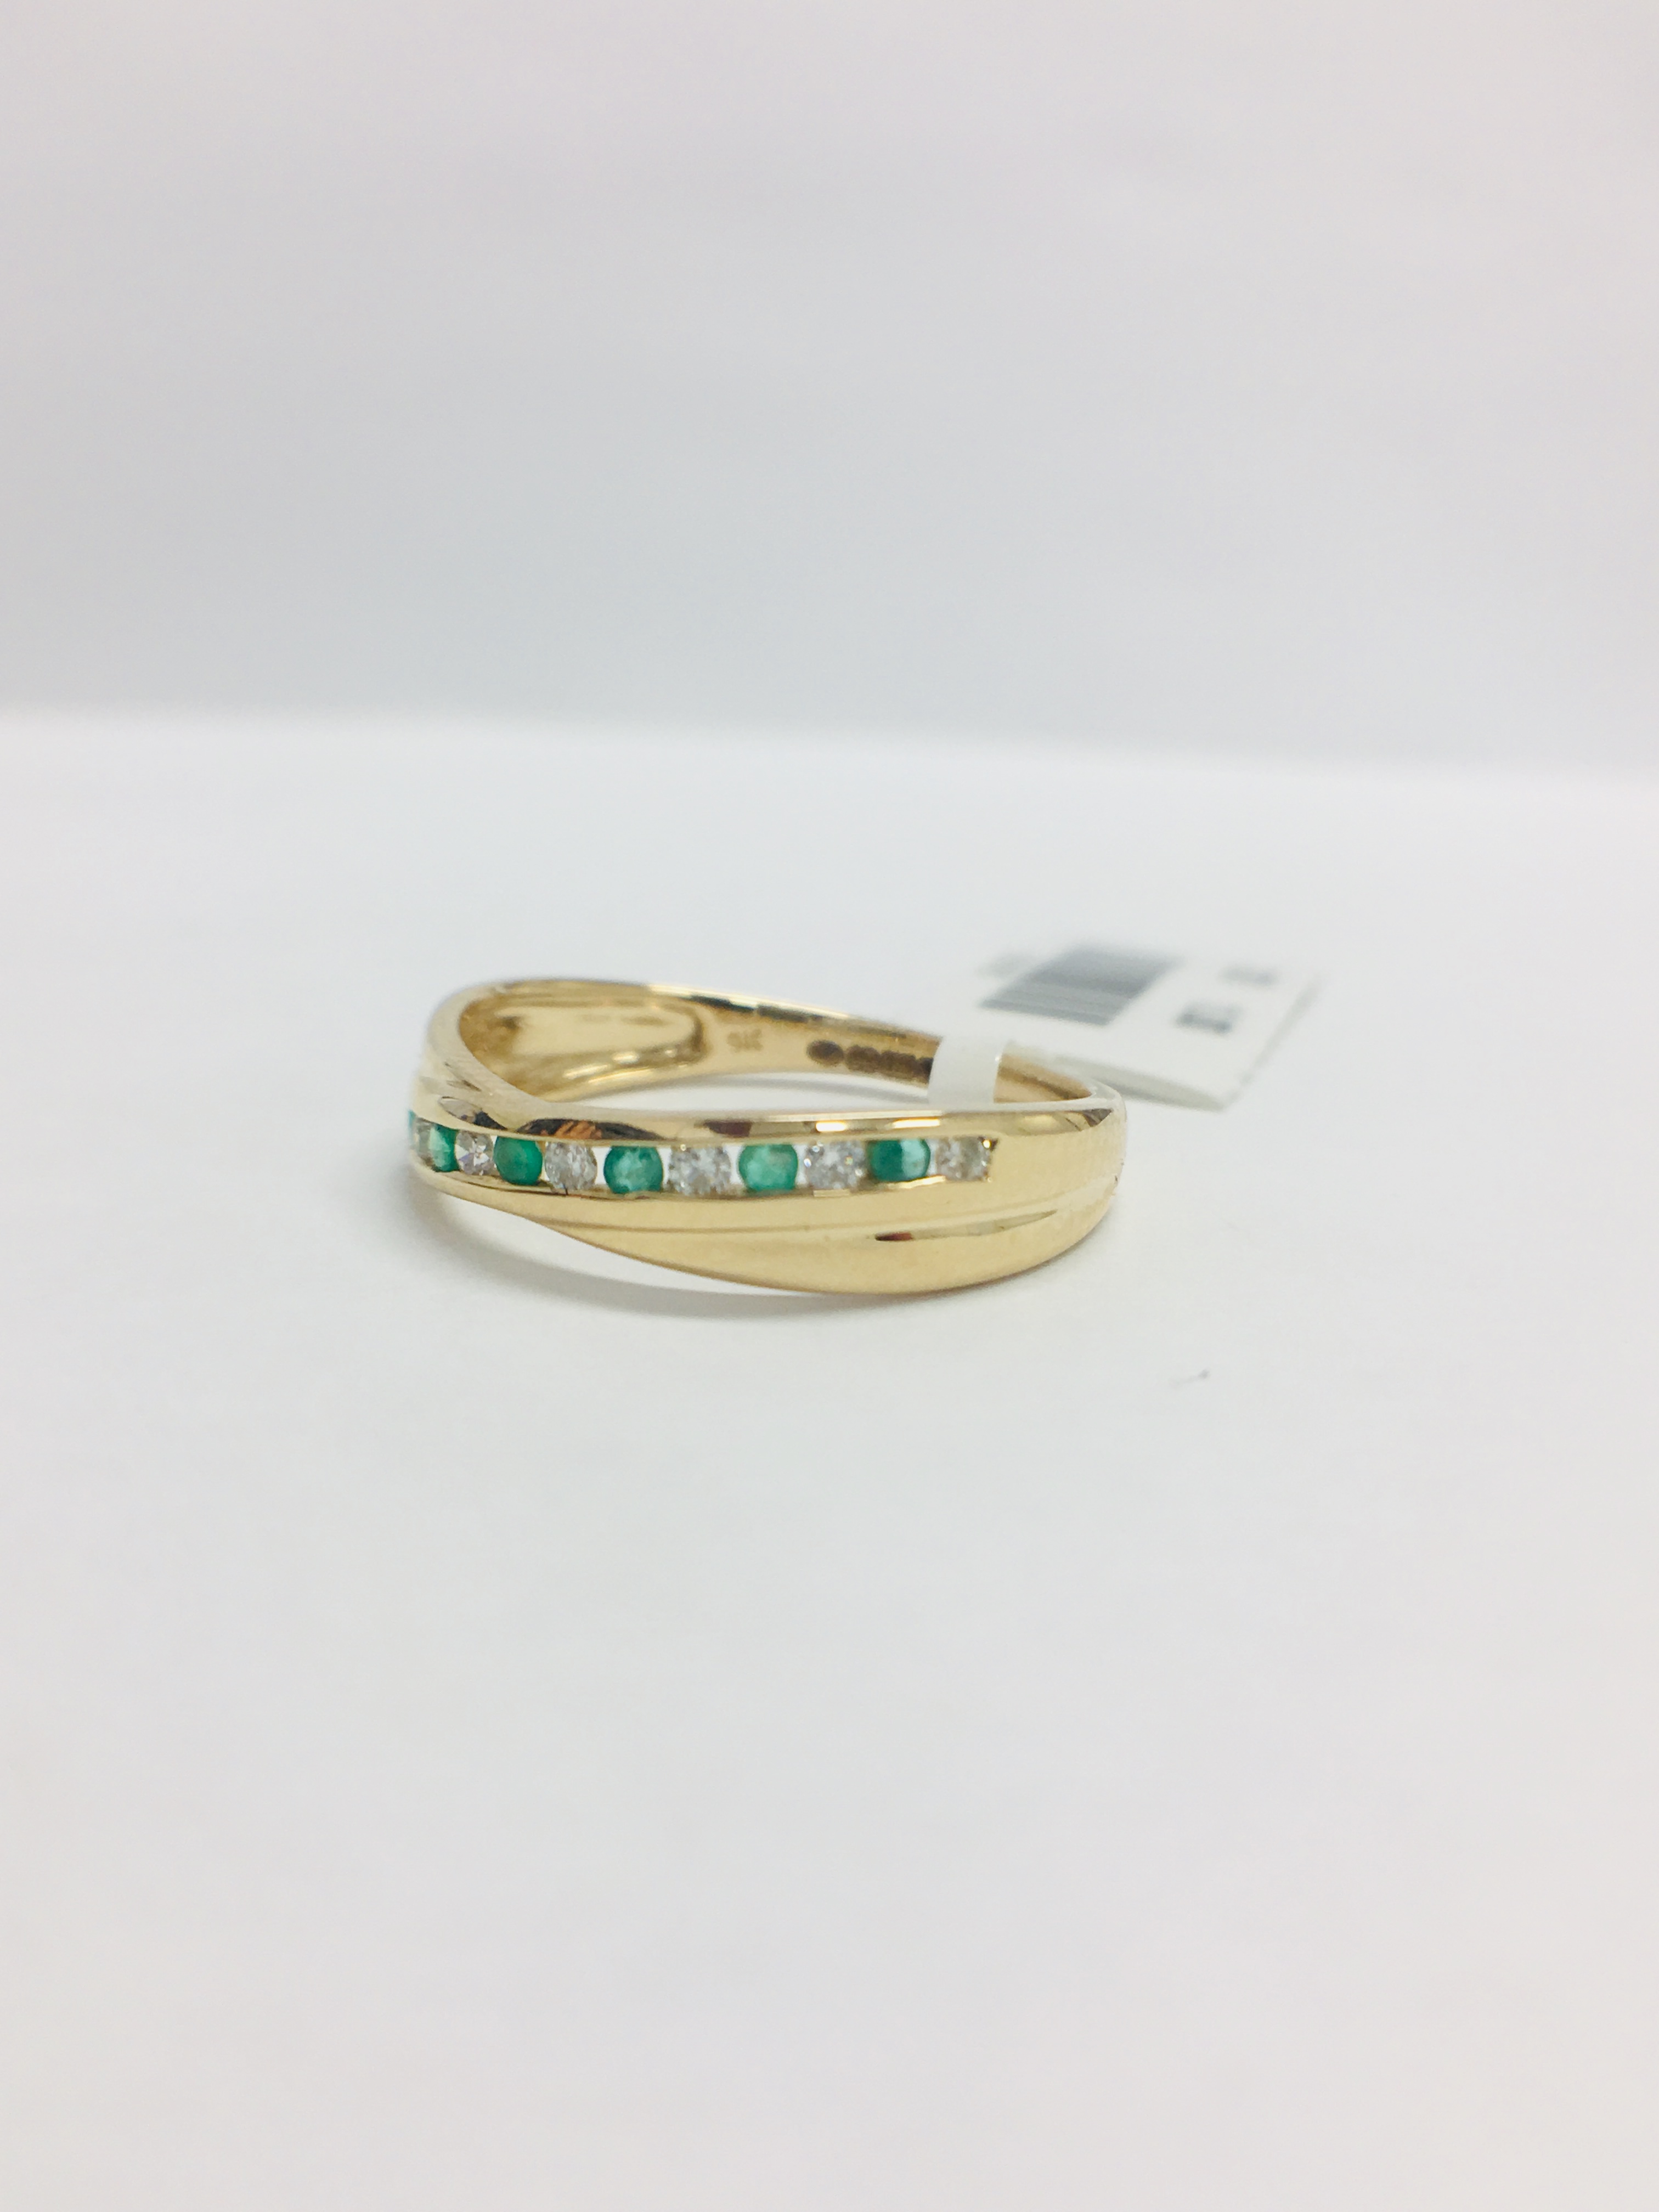 9Ct Yellow Gold Emerald Diamond Crossover Band Ring, - Image 3 of 11